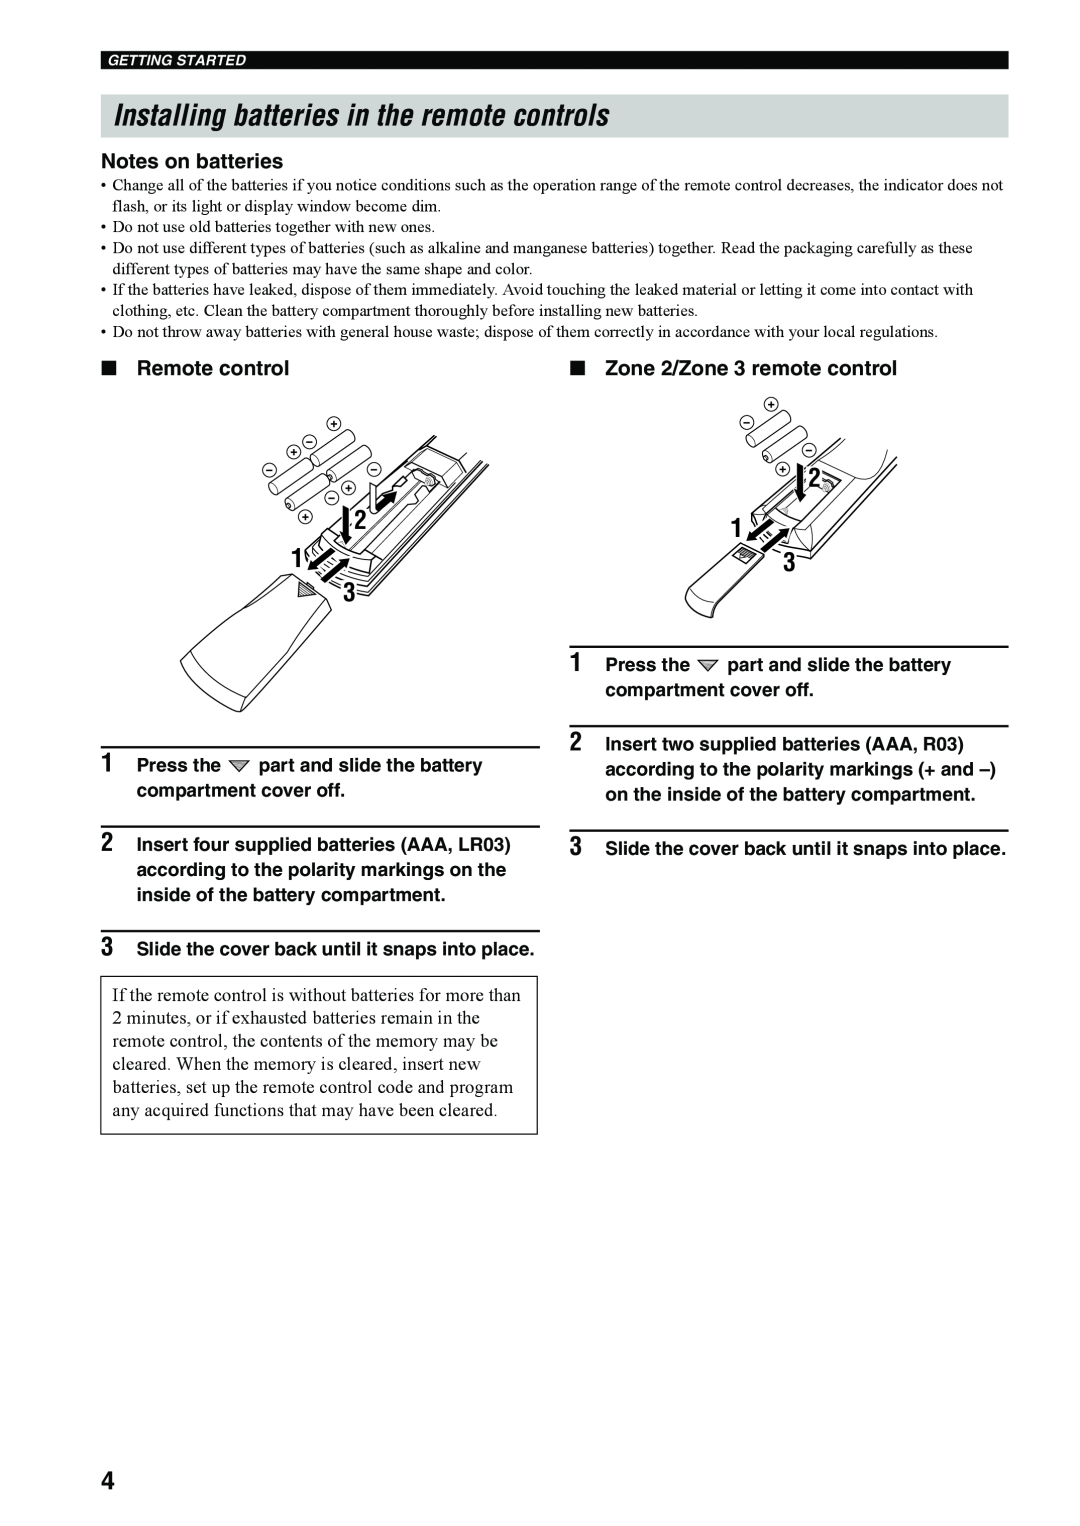 Yamaha RX-V4600 owner manual Installing batteries in the remote controls, Notes on batteries, Remote control 